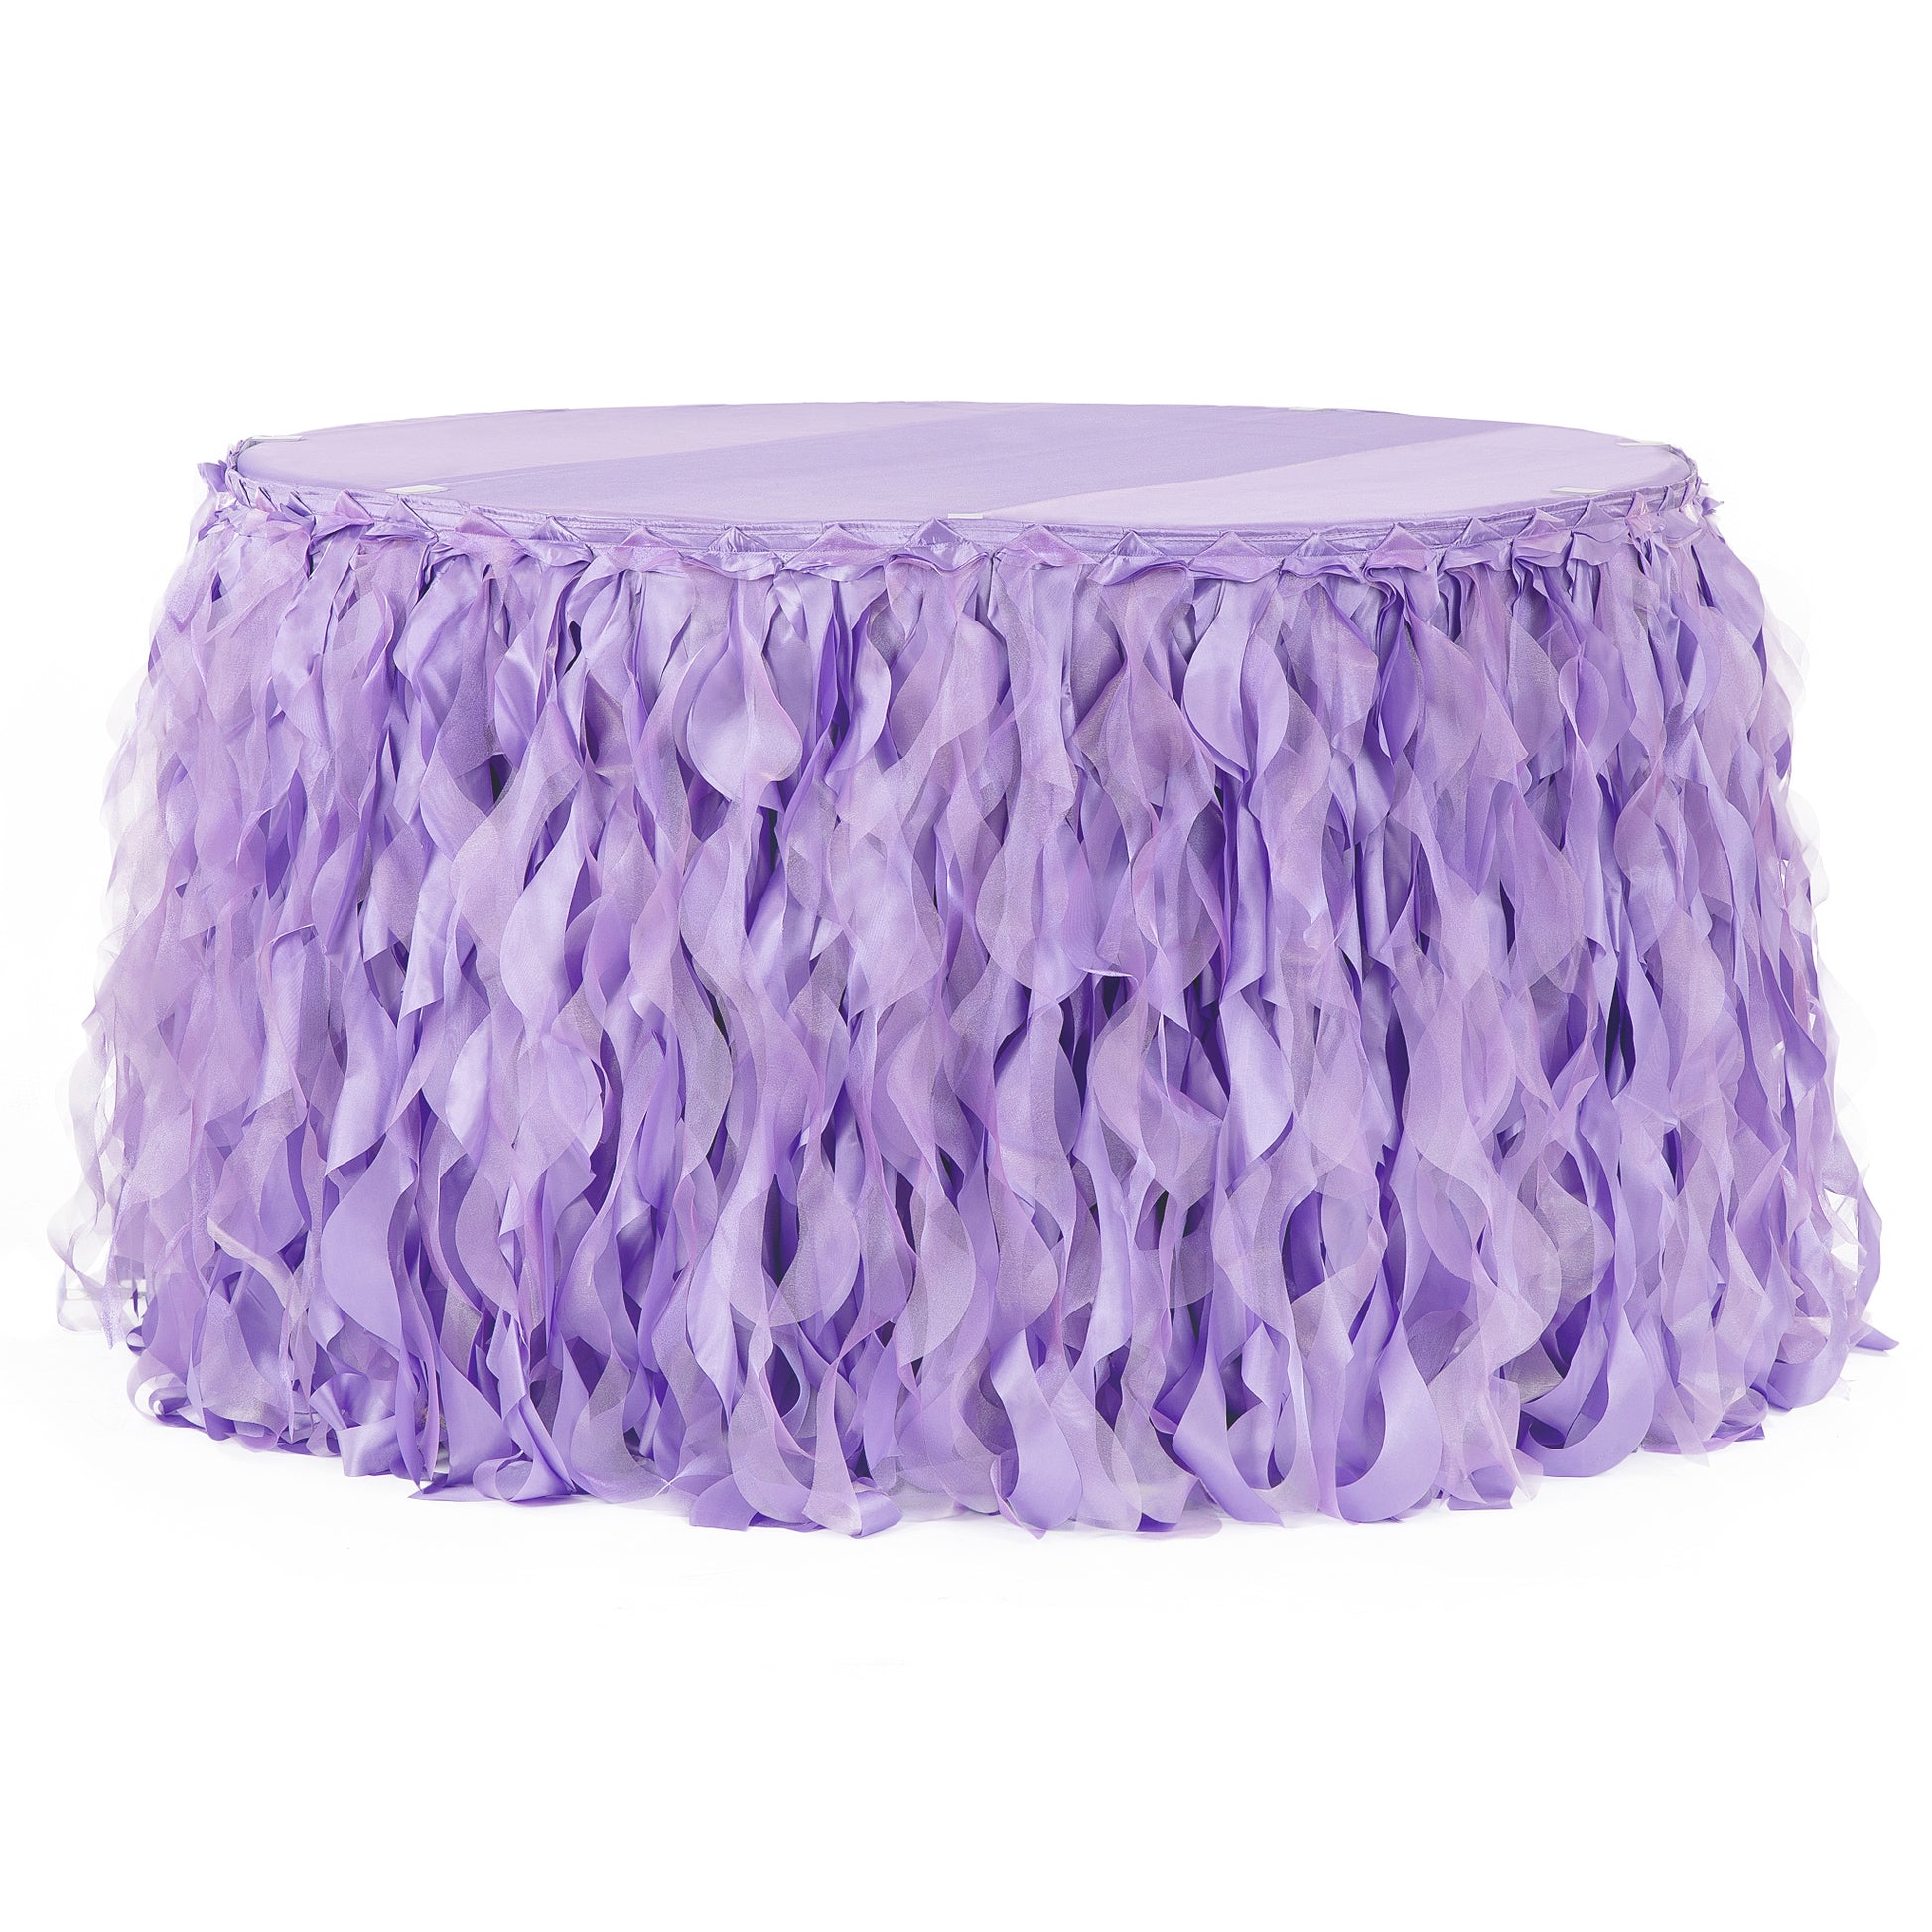 Curly Willow 14ft Table Skirt - Victorian Lilac/Wisteria - CV Linens